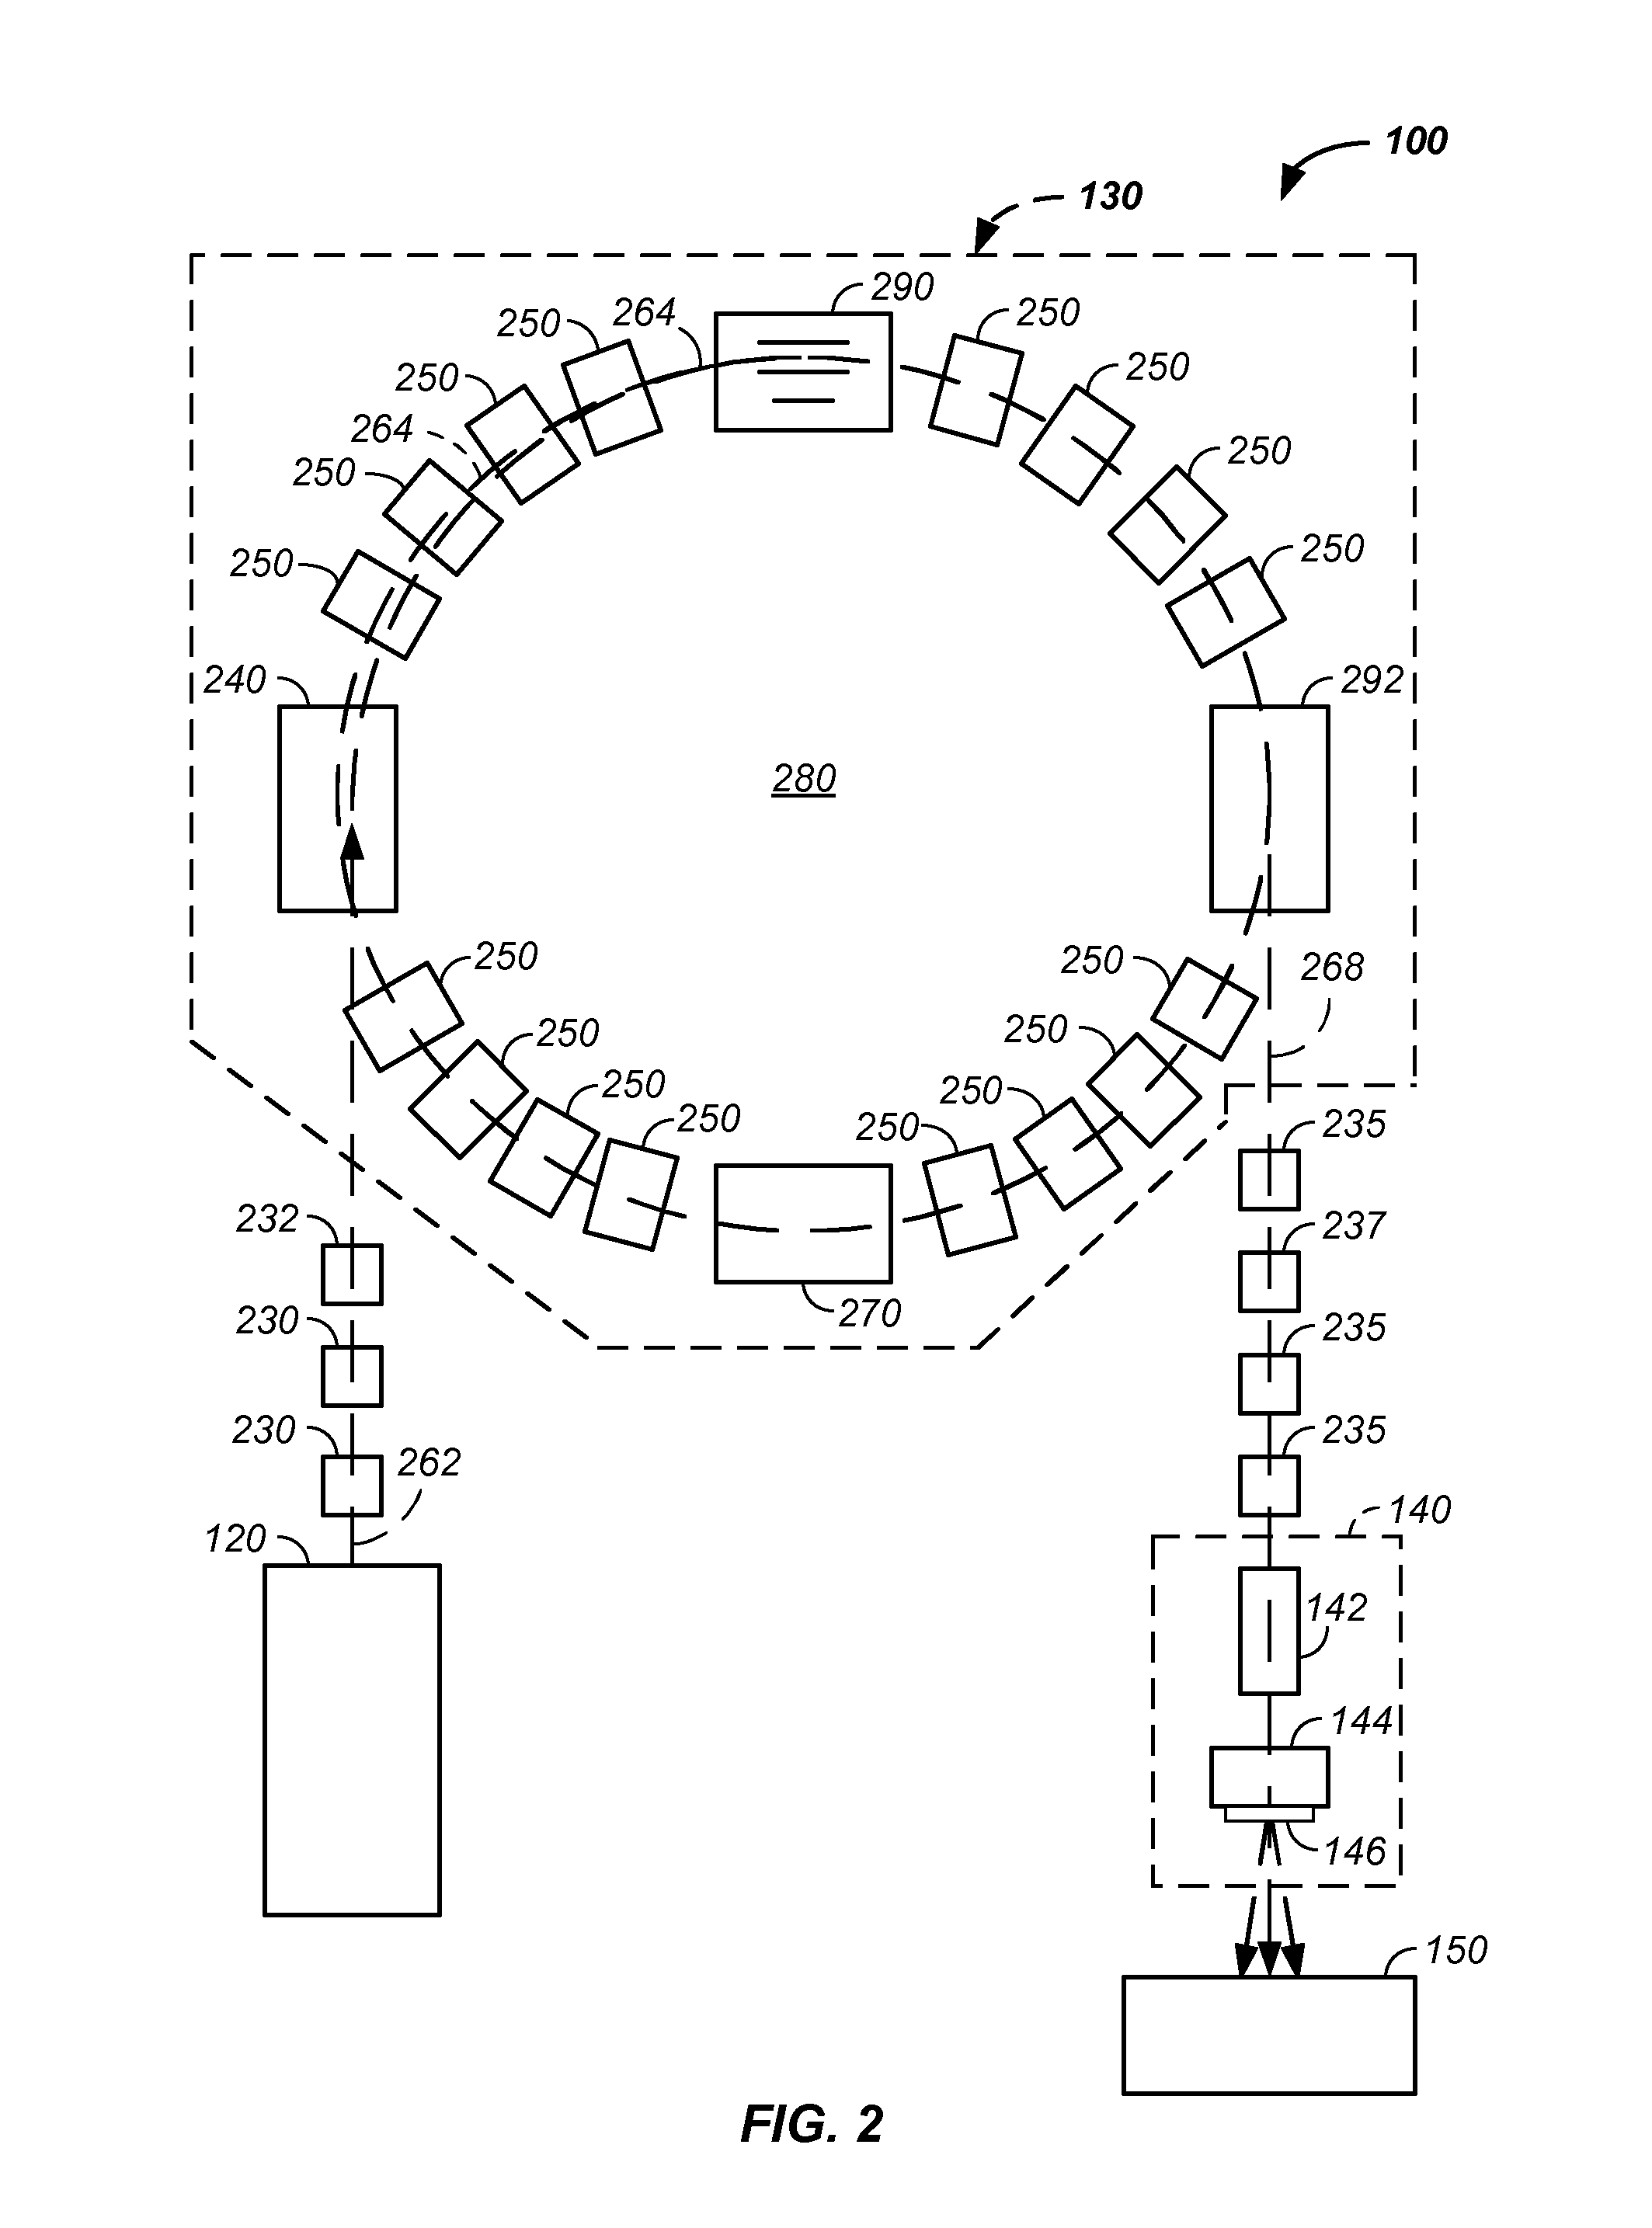 Charged particle cancer therapy system X-ray apparatus and method of use thereof